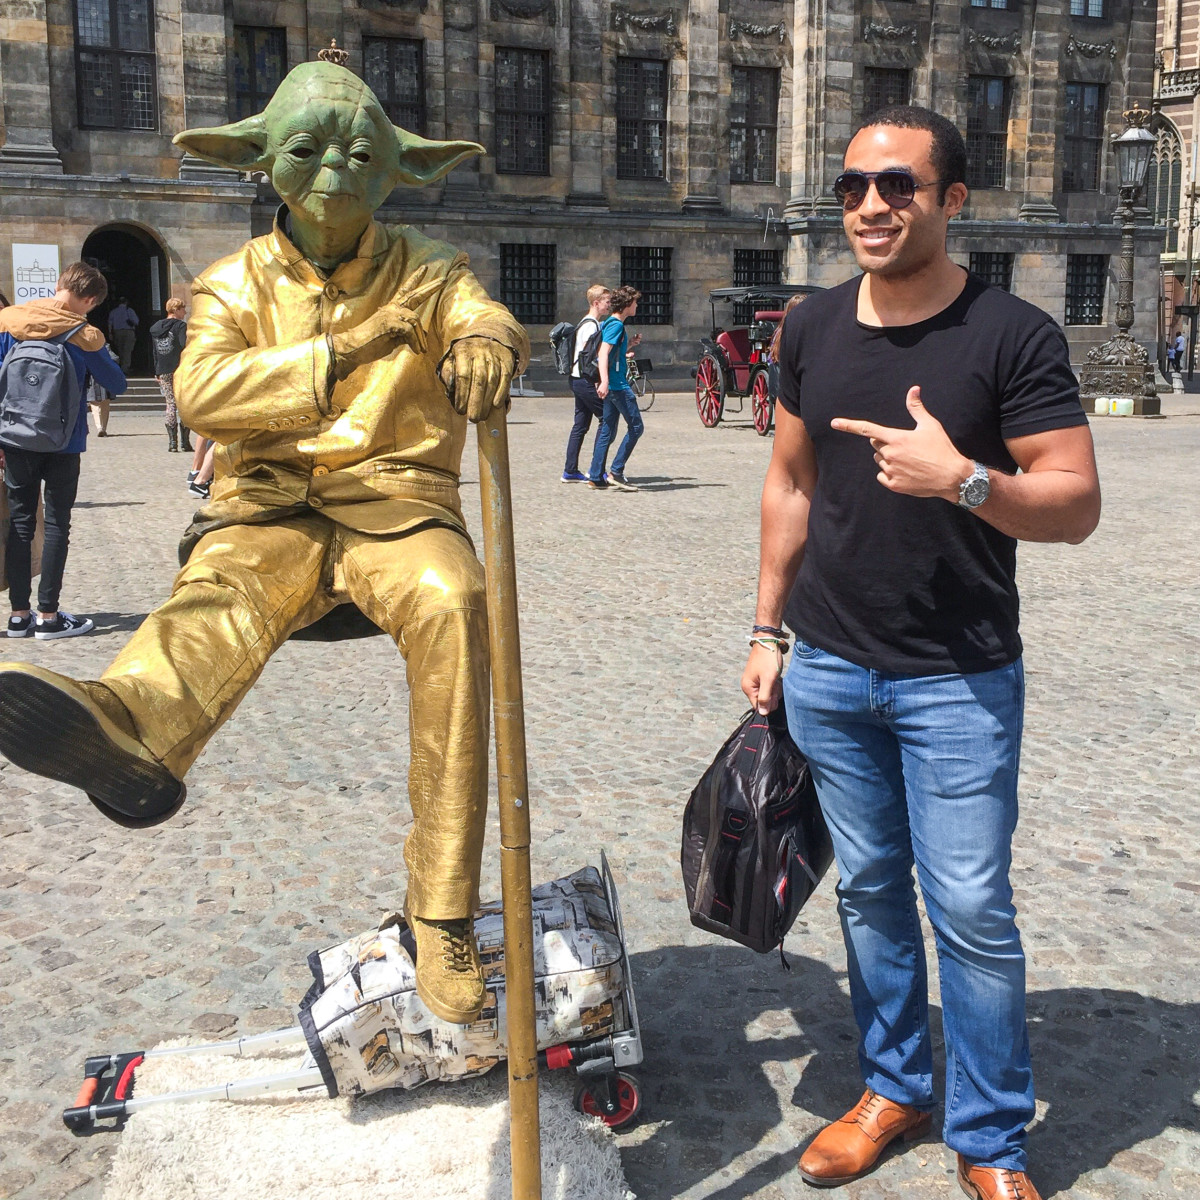 Phillip Lew in a courtyard in Amsterdam with a street performer wearing a gold suit and a Yoda mask